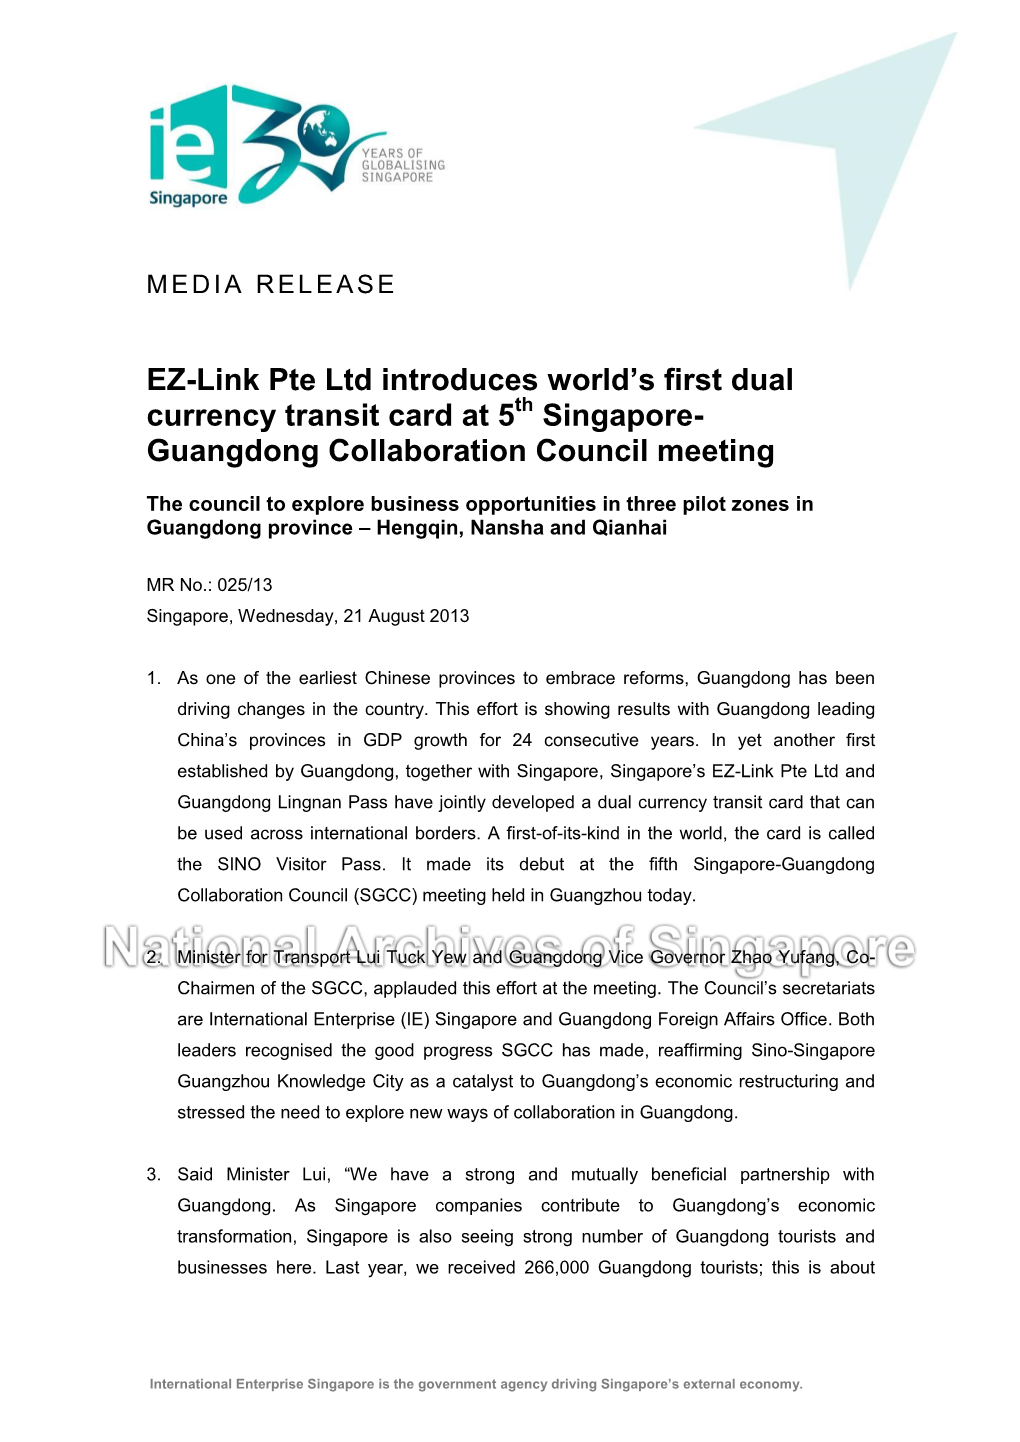 EZ-Link Pte Ltd Introduces World's First Dual Currency Transit Card at 5